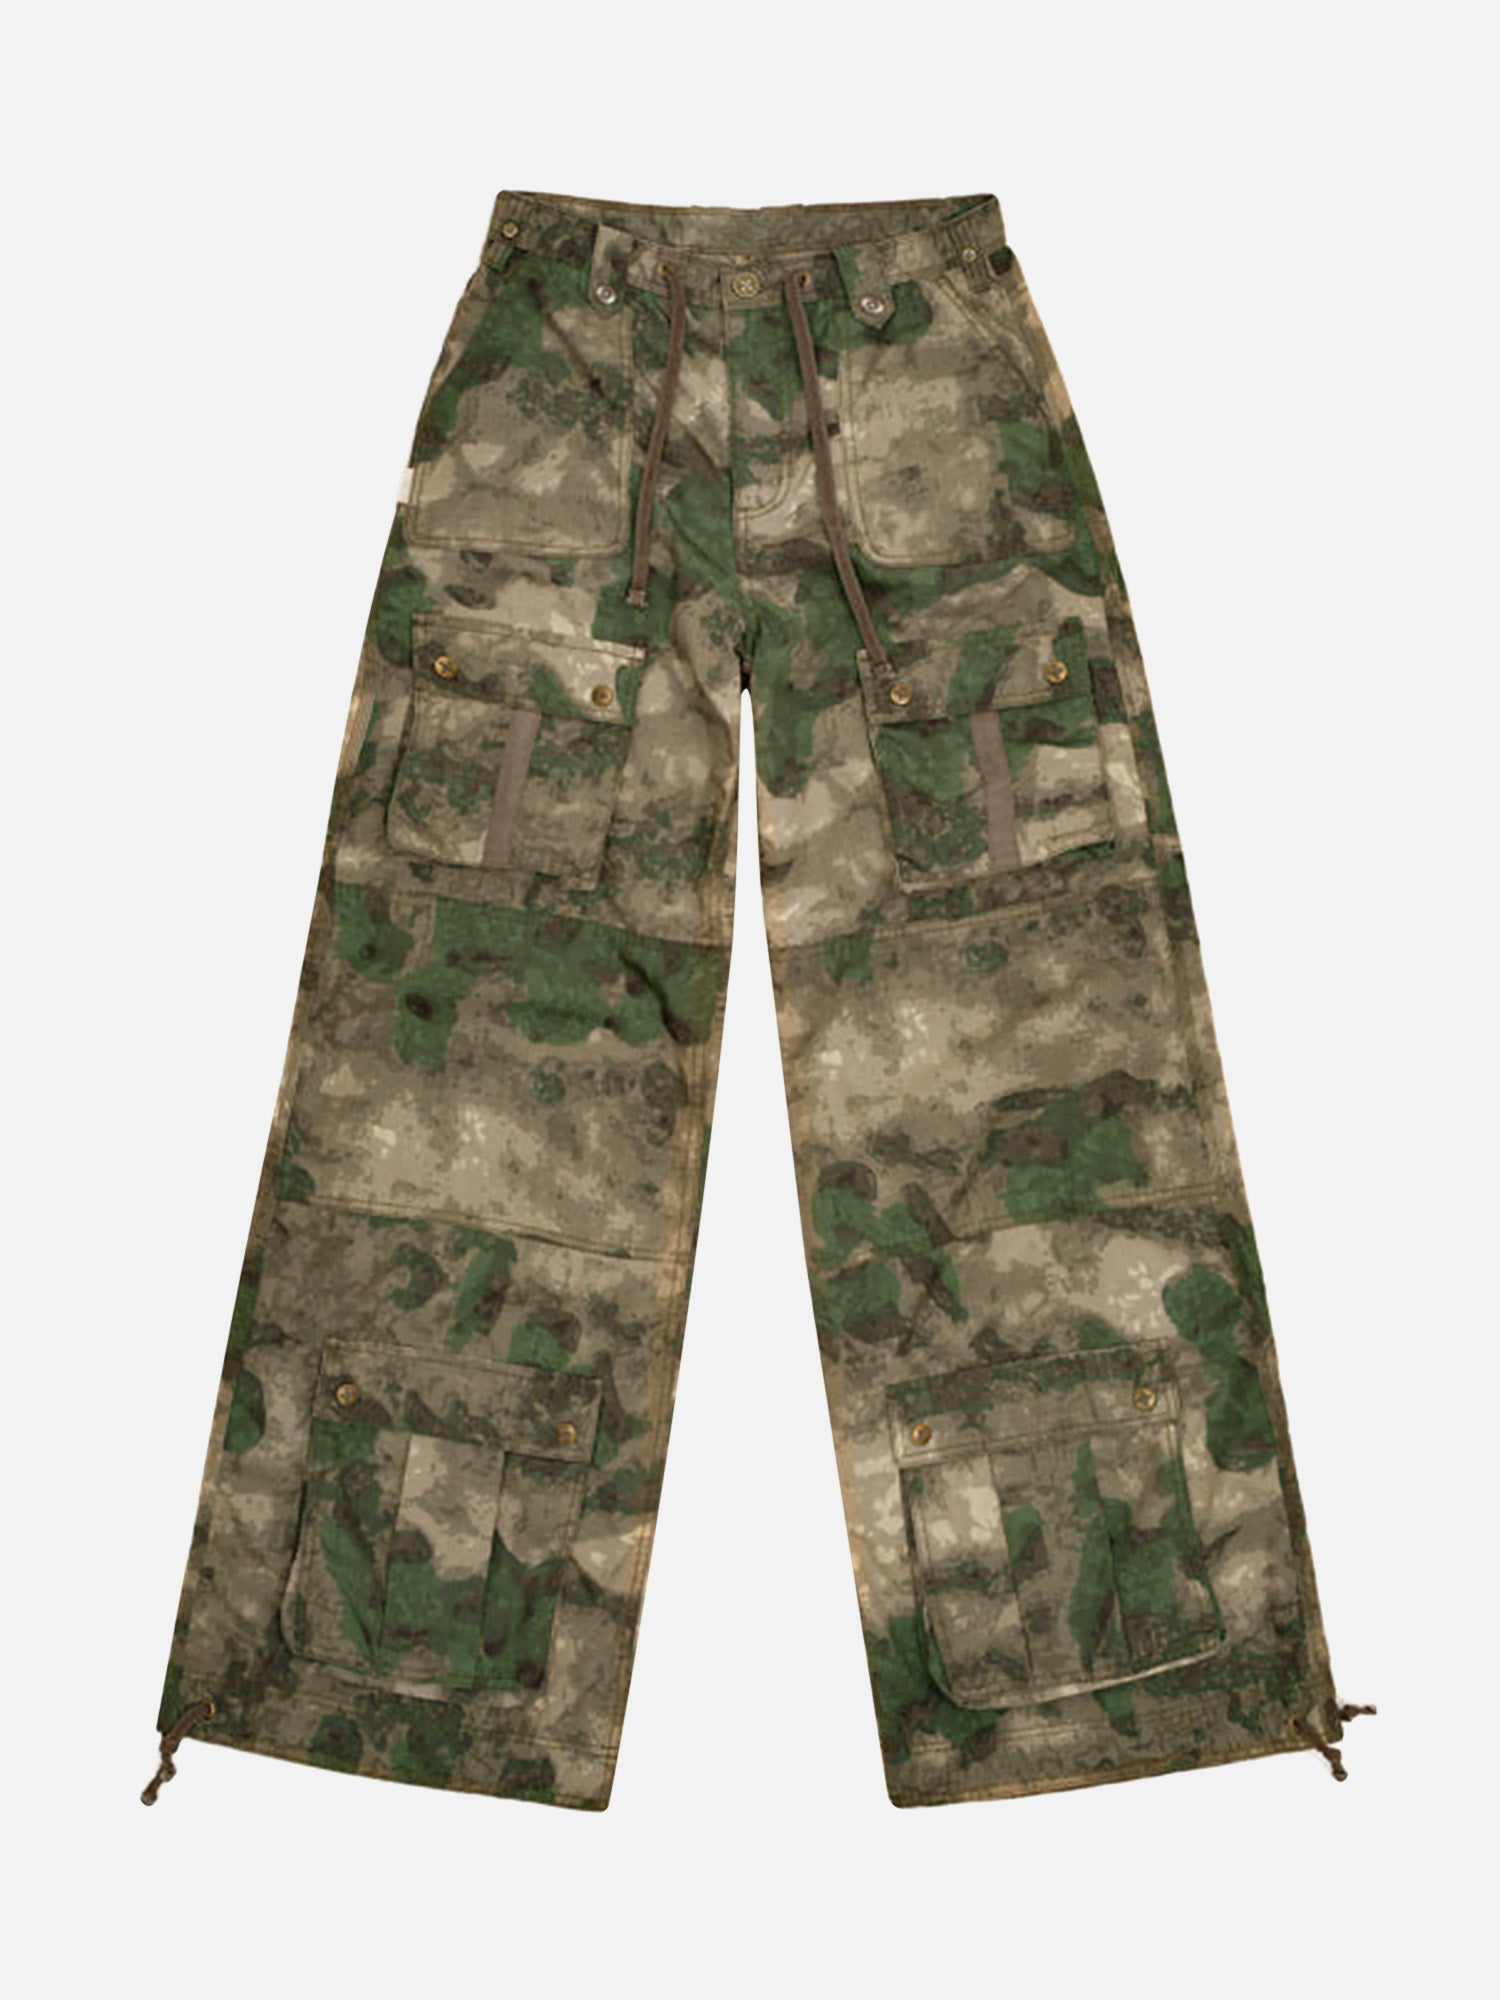 Thesupermade Viper Thermal Camouflage Hiking Pants Adjustable Wide Leg Pants